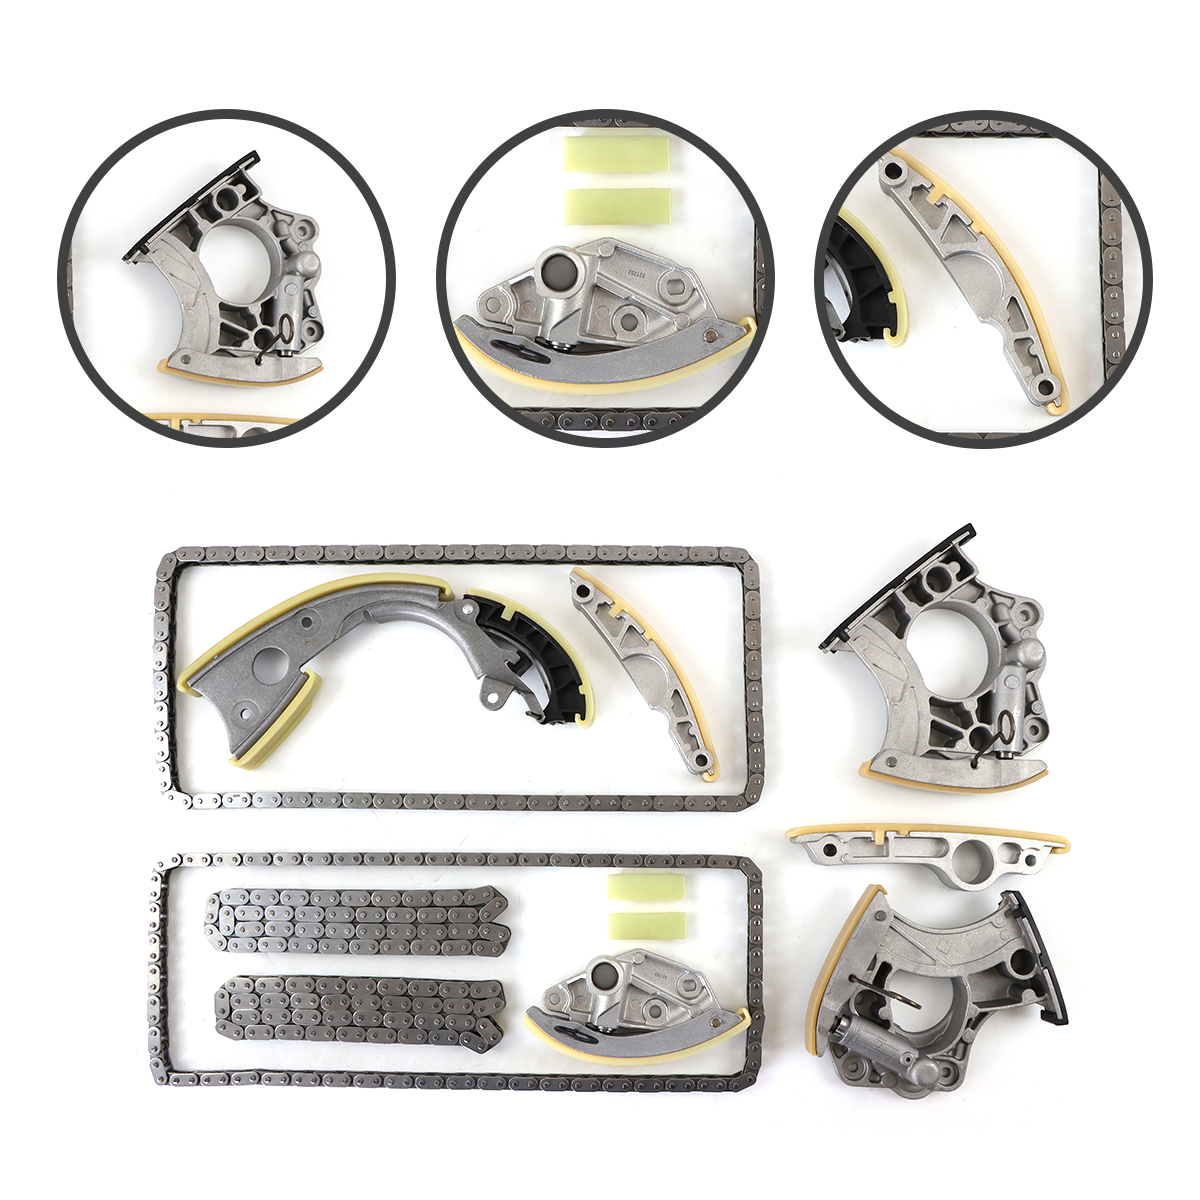 Daysyore® Timing Chain Kit for Audi Q5 A6 3.2 3.0 V6 A8 S6 S7 S8 4.0 V8 CCAA CALA